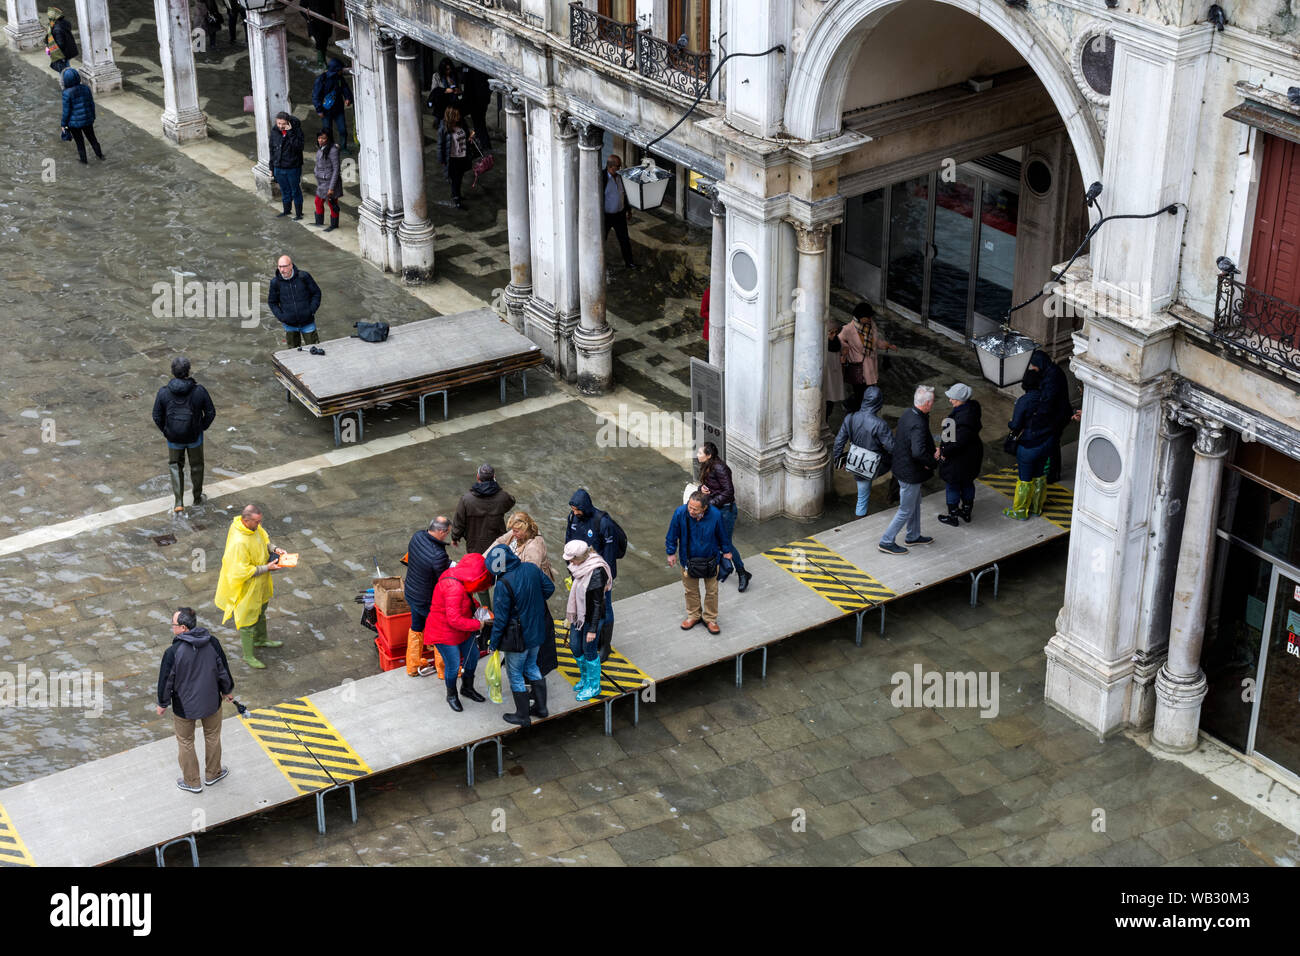 People walking on elevated platforms during an Acqua alta (high water) event, Saint Mark's Square, Venice, Italy Stock Photo